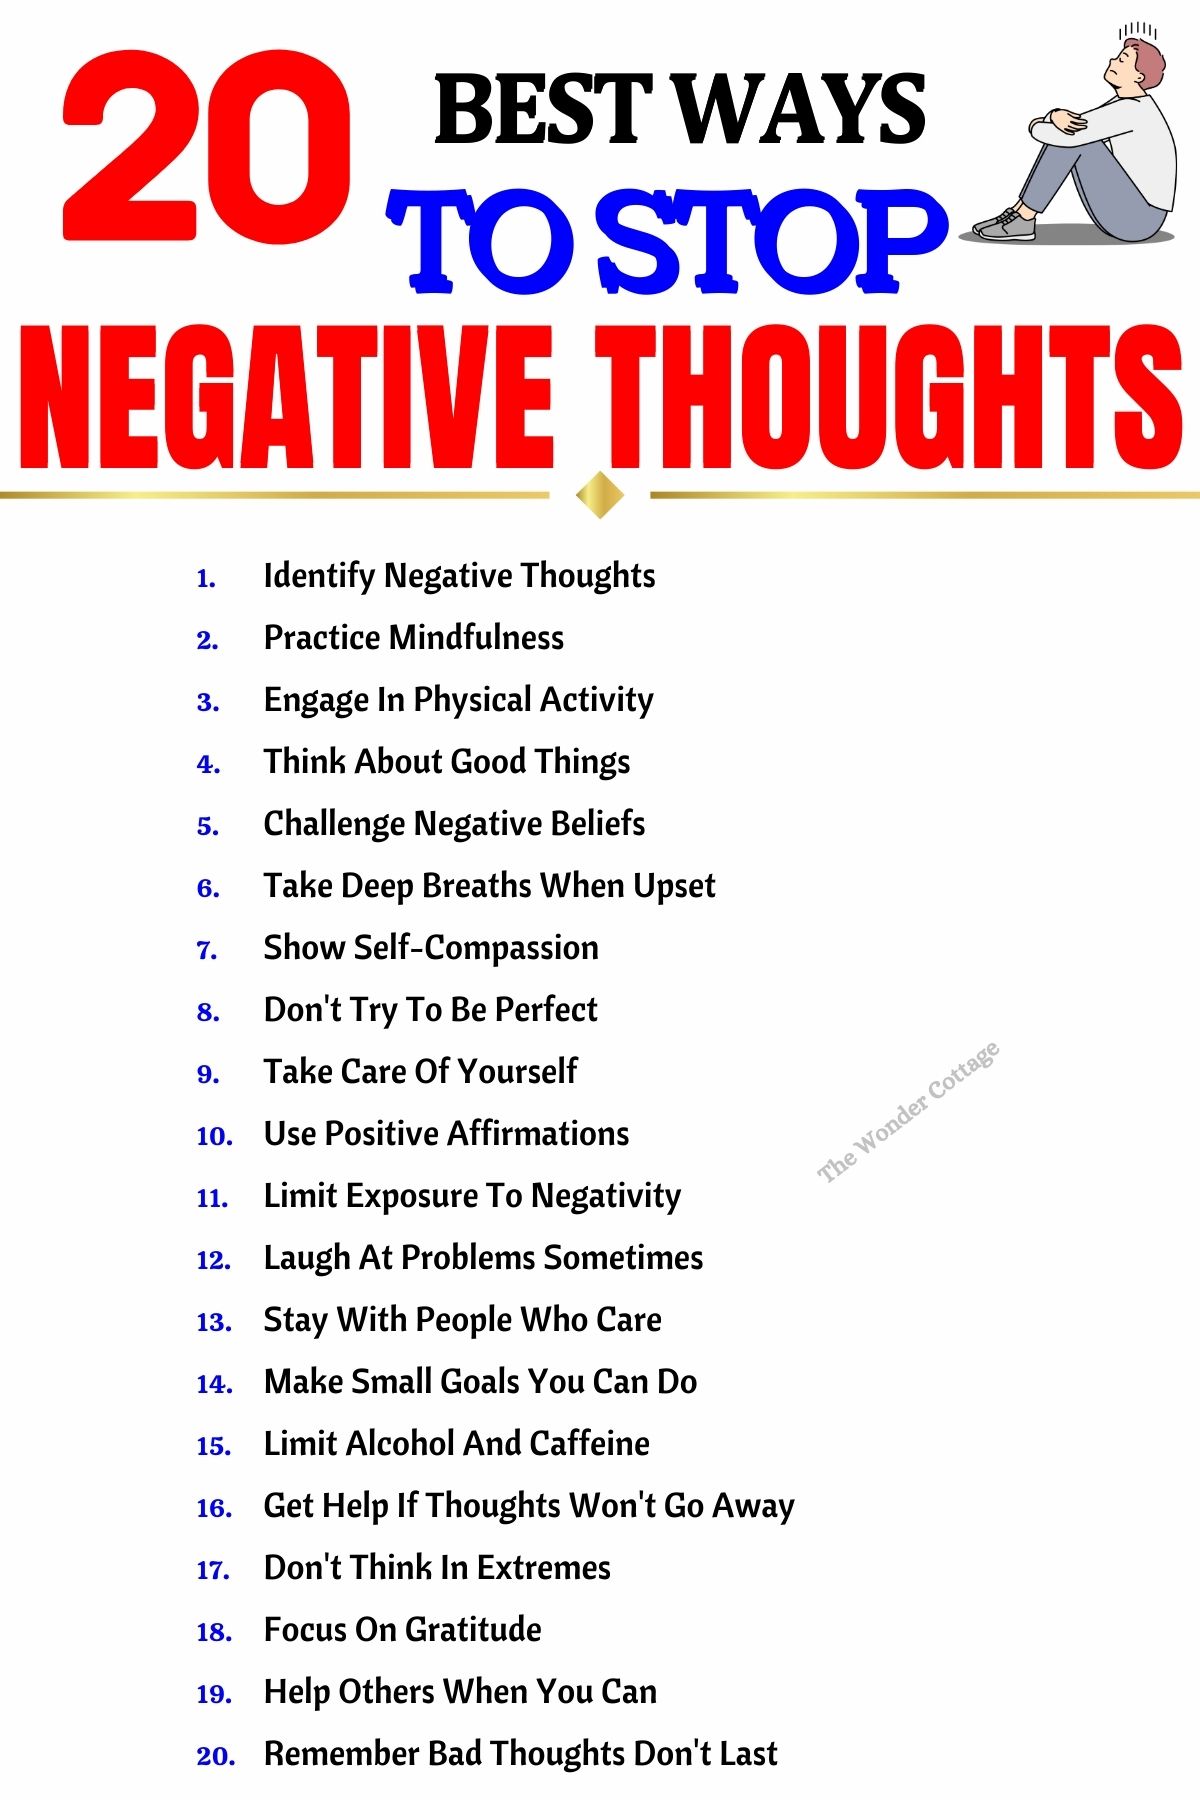 20 Best Ways To Stop Negative Thoughts